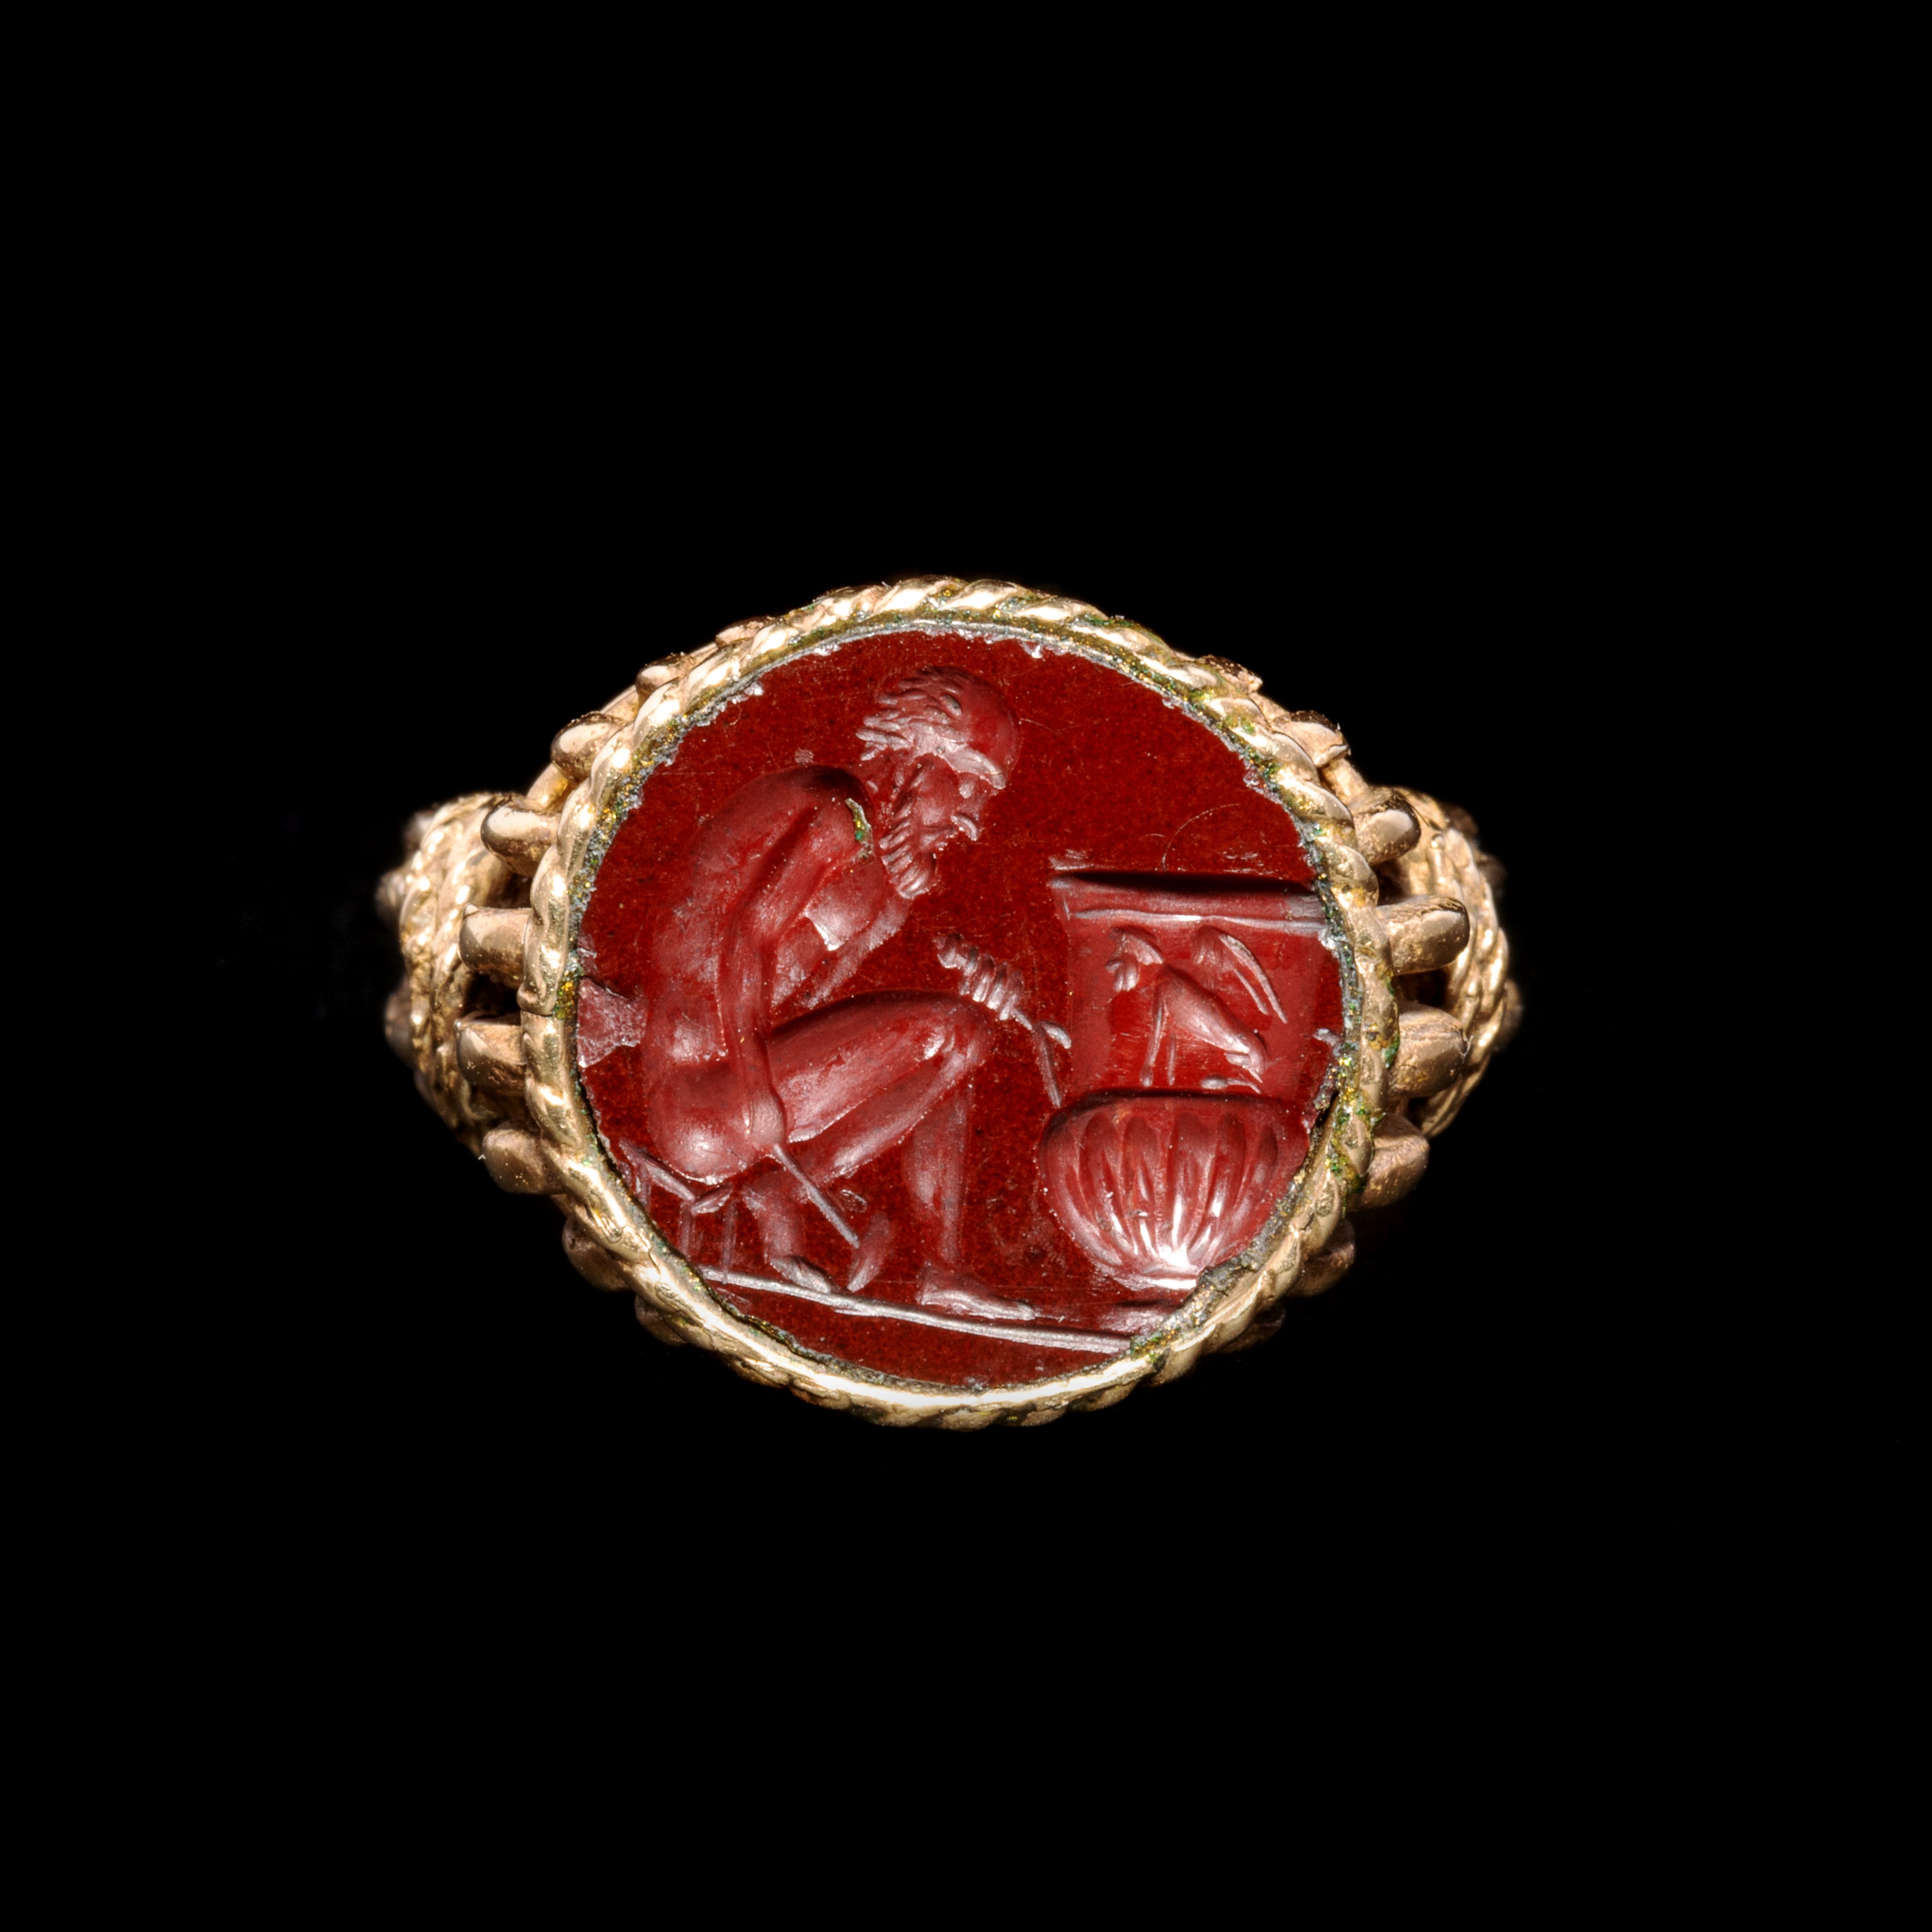 A Roman Red Jasper Ring Stone of a Nude Sculptor Ring size 7 1/2; Length of stone 9/16 inch (1.4 cm) - Image 3 of 3